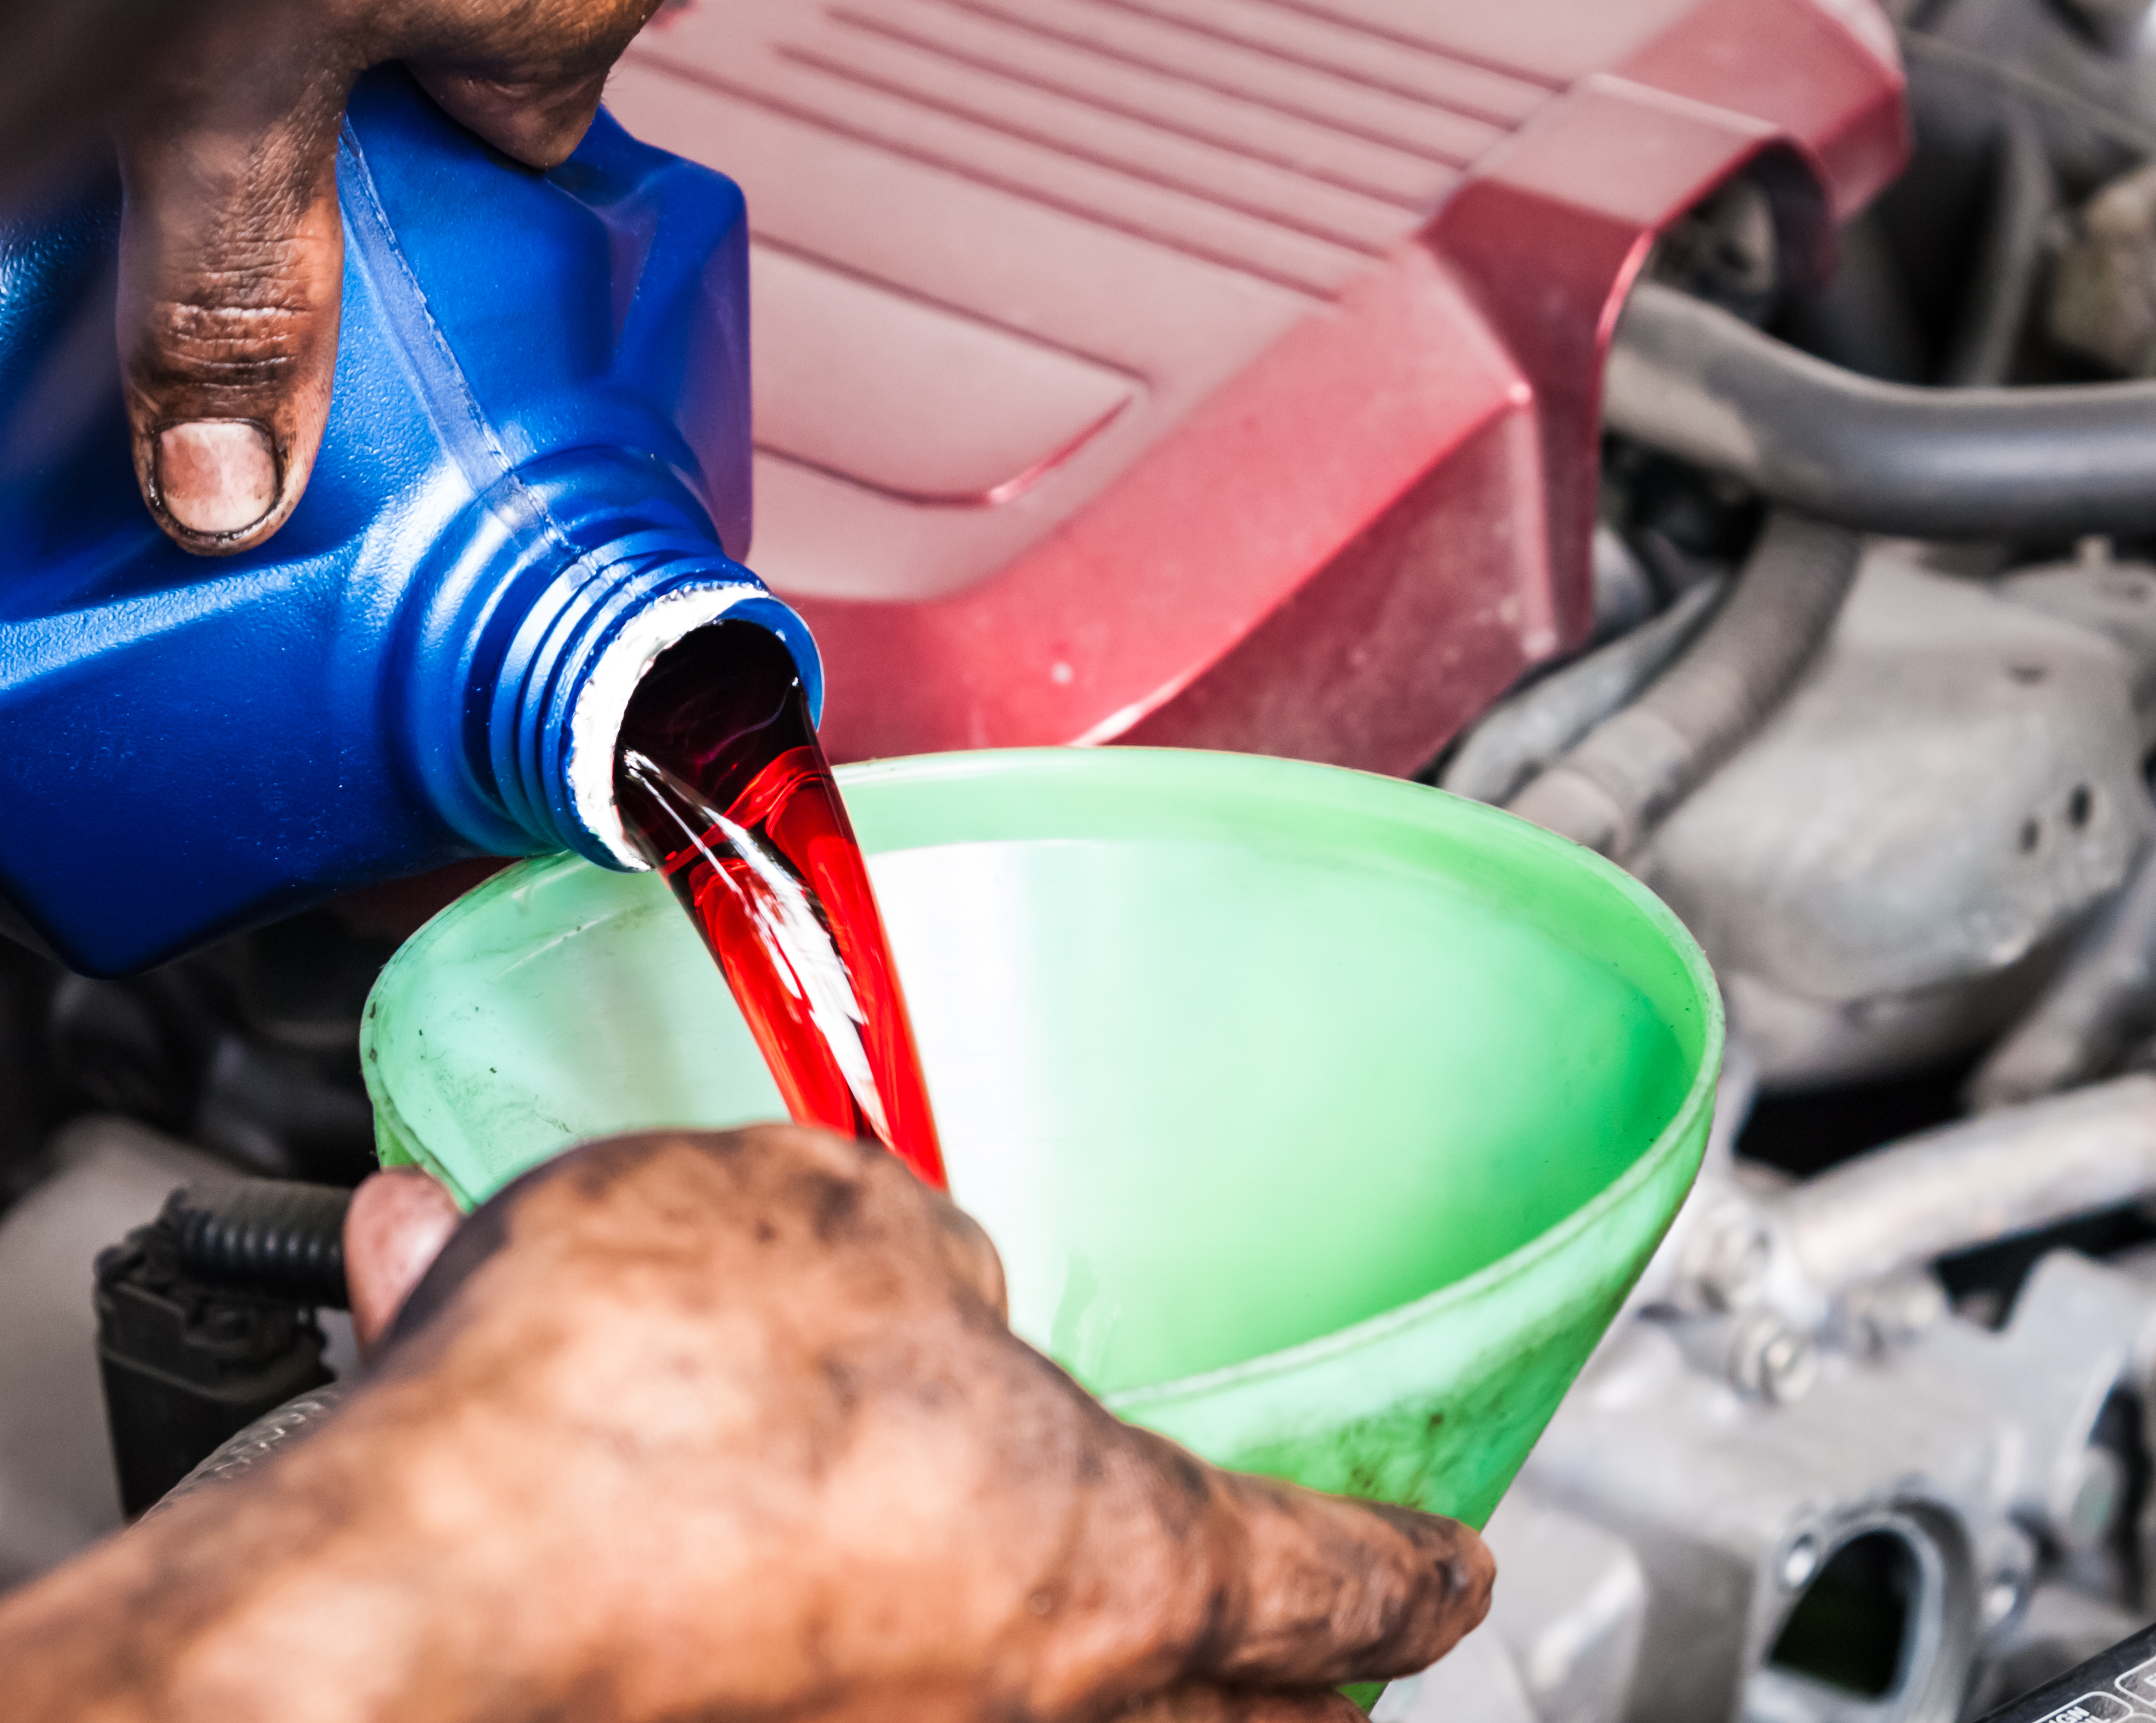 Transmission fluid should be pink or red in color. AAMCO CO.